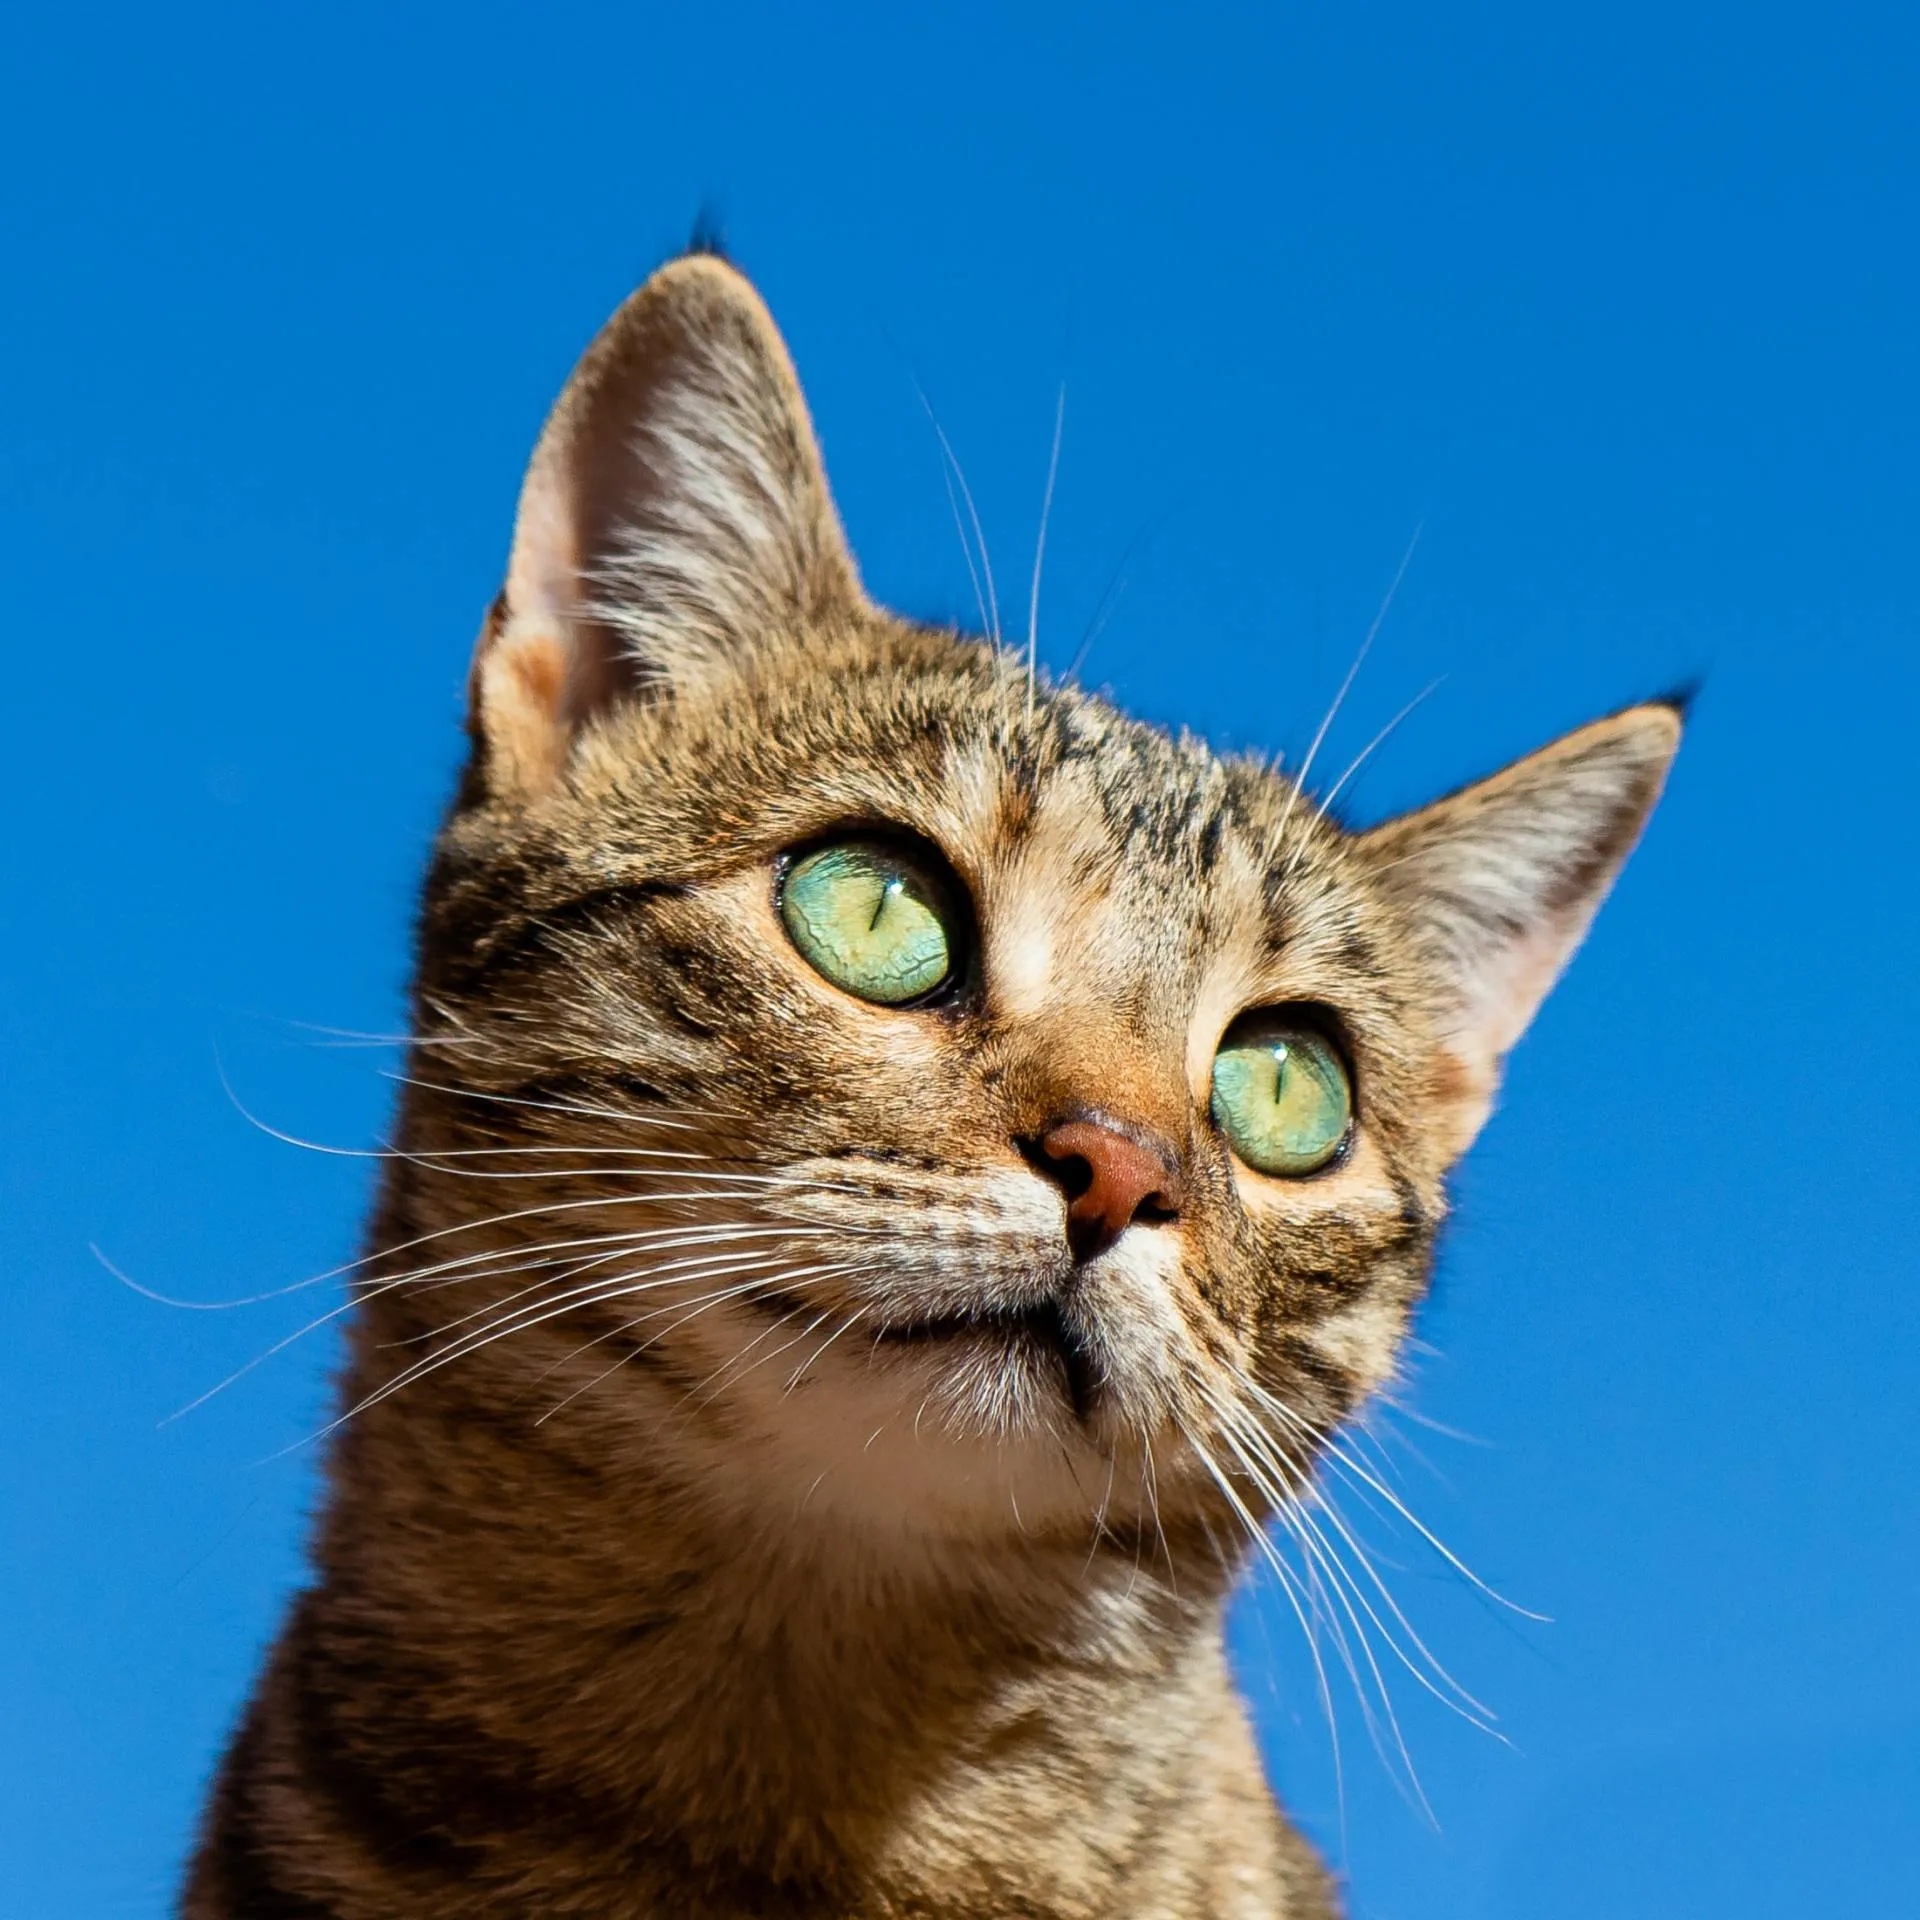 Kitten with green eyes in front of a sky blue background